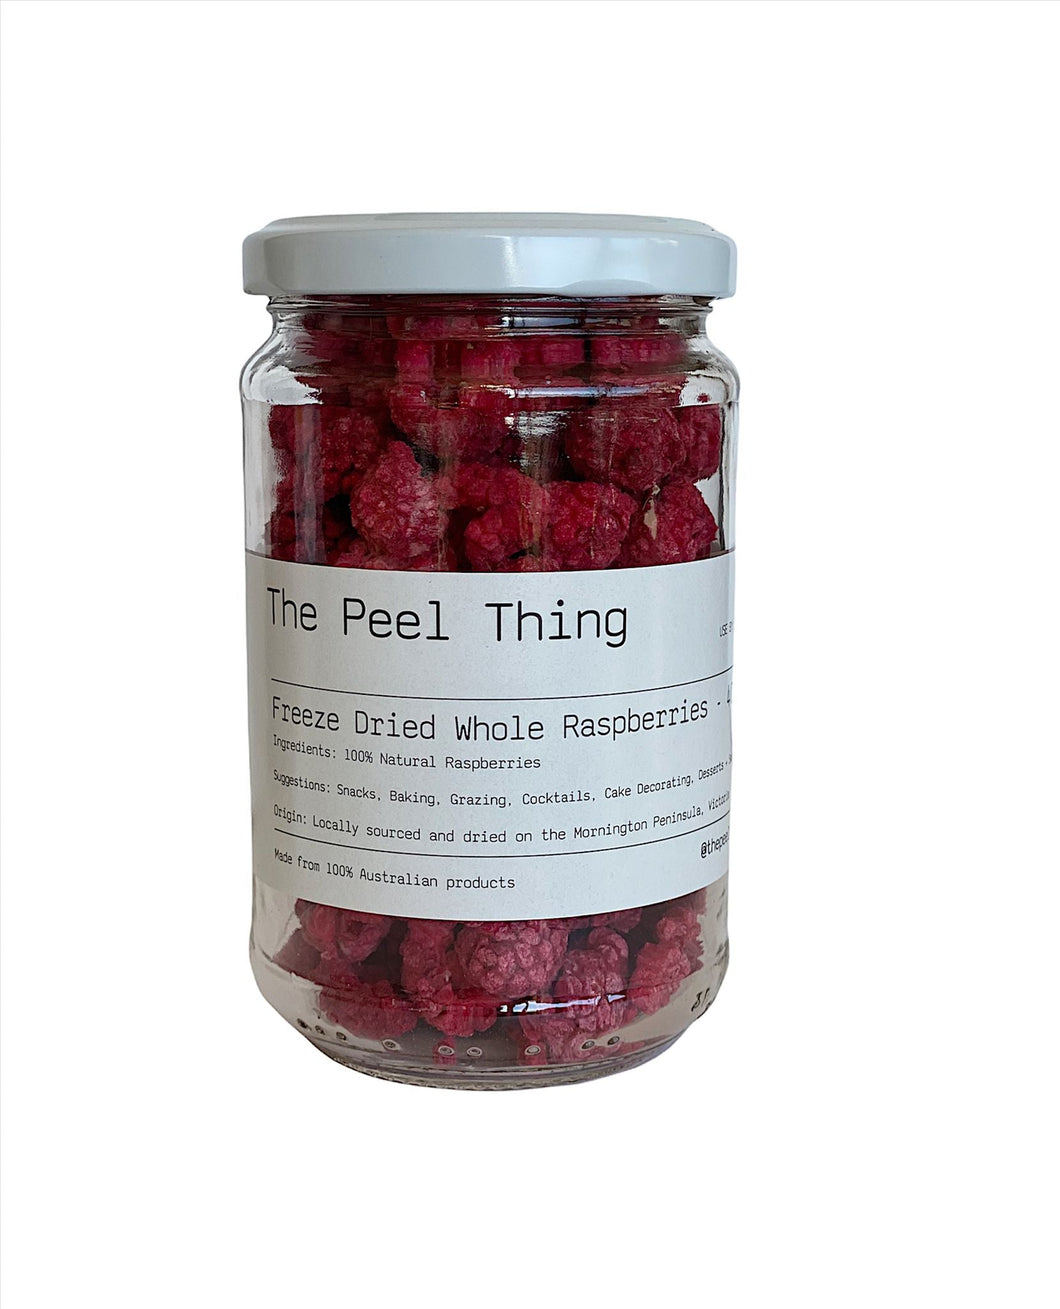 The Peel Thing - Whole Freeze Dried Raspberries (40g)